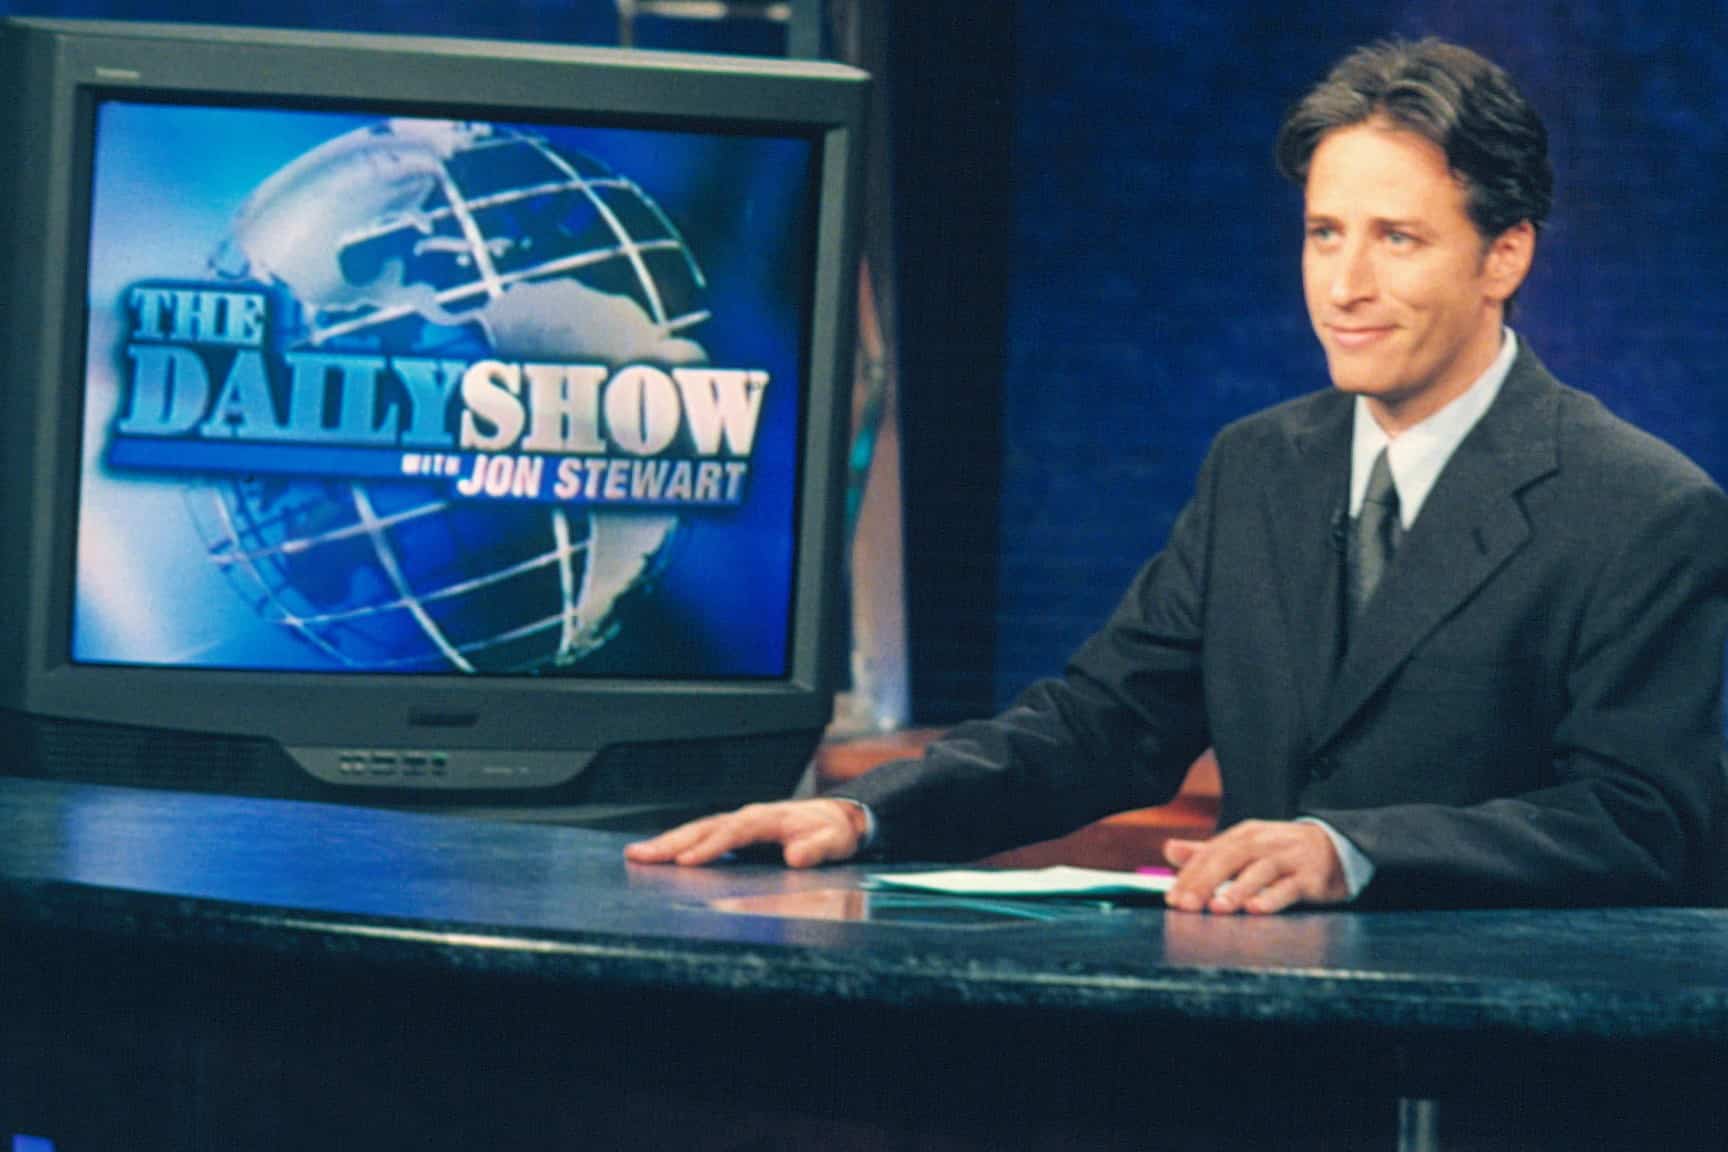 Jon Stewart took over as the host of "The Daily Show" on Comedy Central in 1998